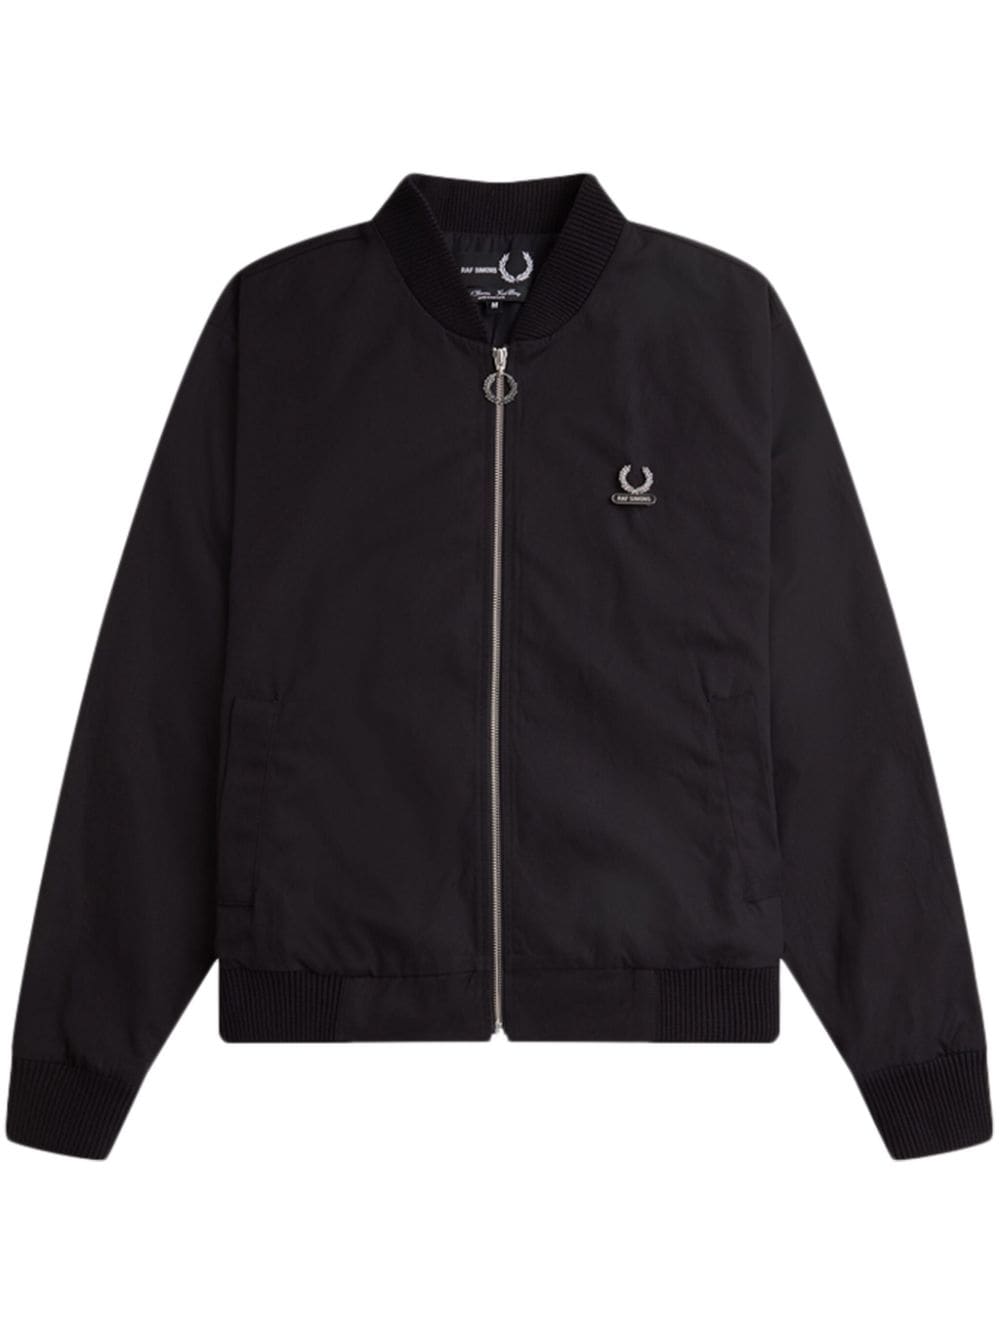 Fred Perry X Raf Simons Printed Bomber Jacket In Black